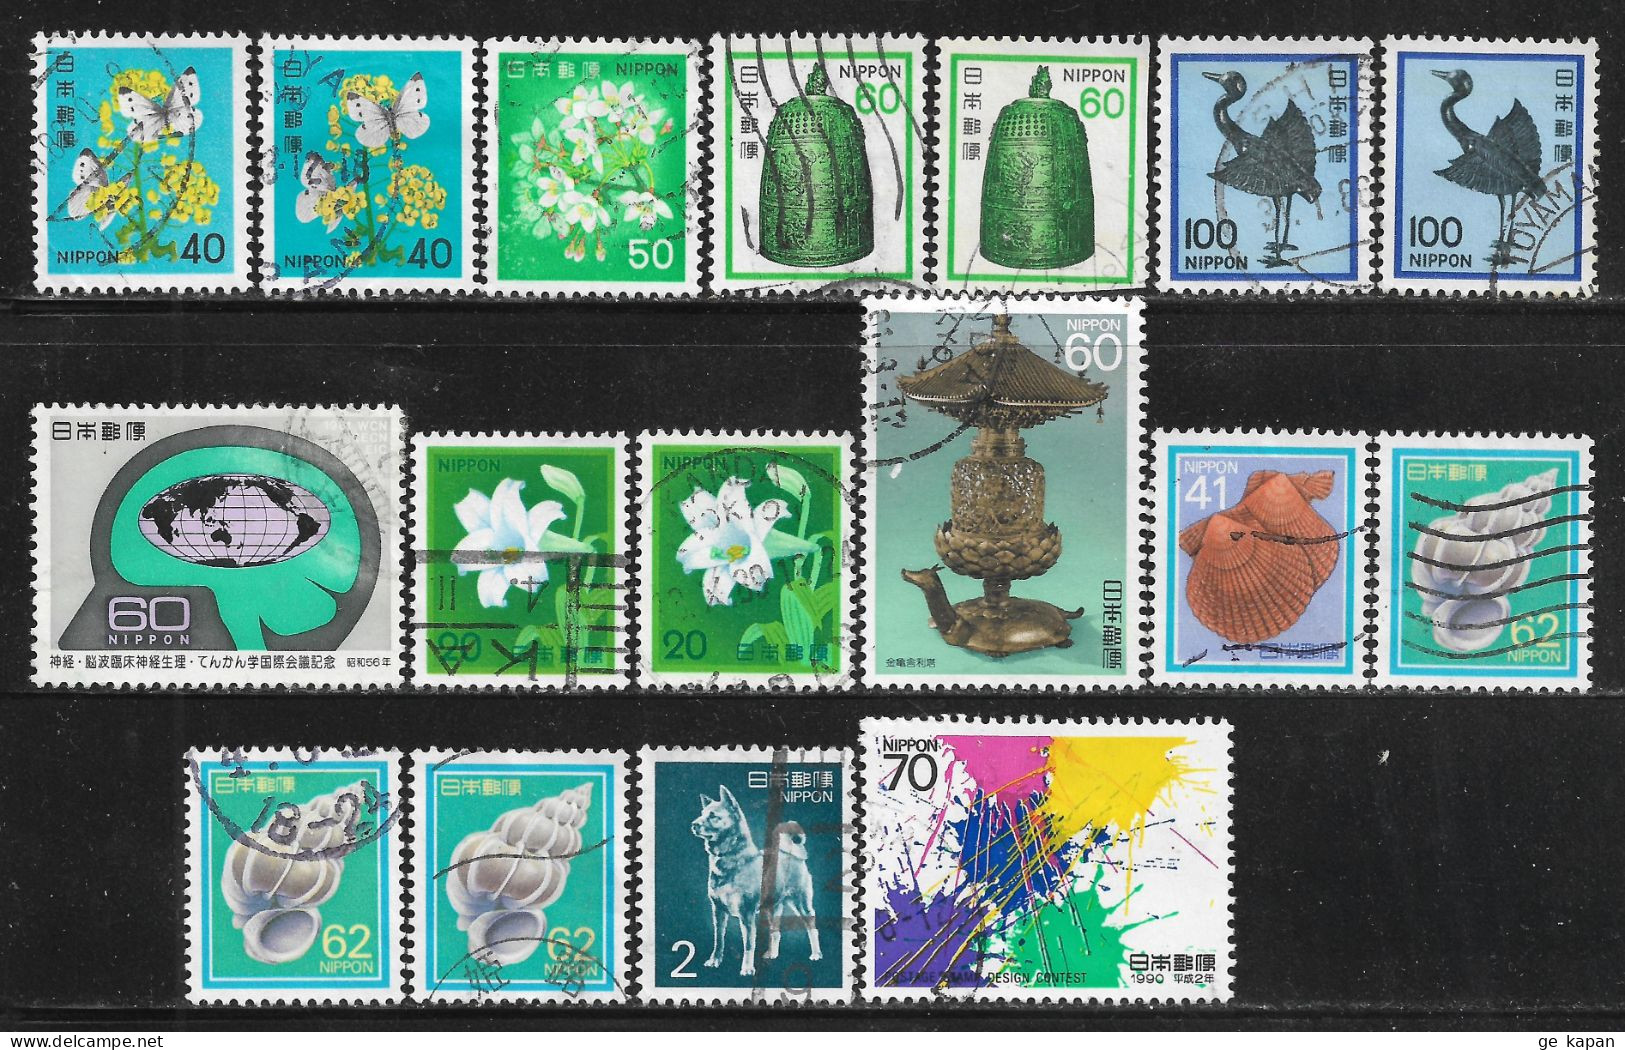 1980-1990 JAPAN Set Of 17 Used Stamps (Michel # 1442A,1443A,1449A,1475A,1485,1518A,1744,1831A,1833,1964) CV €5.40 - Used Stamps